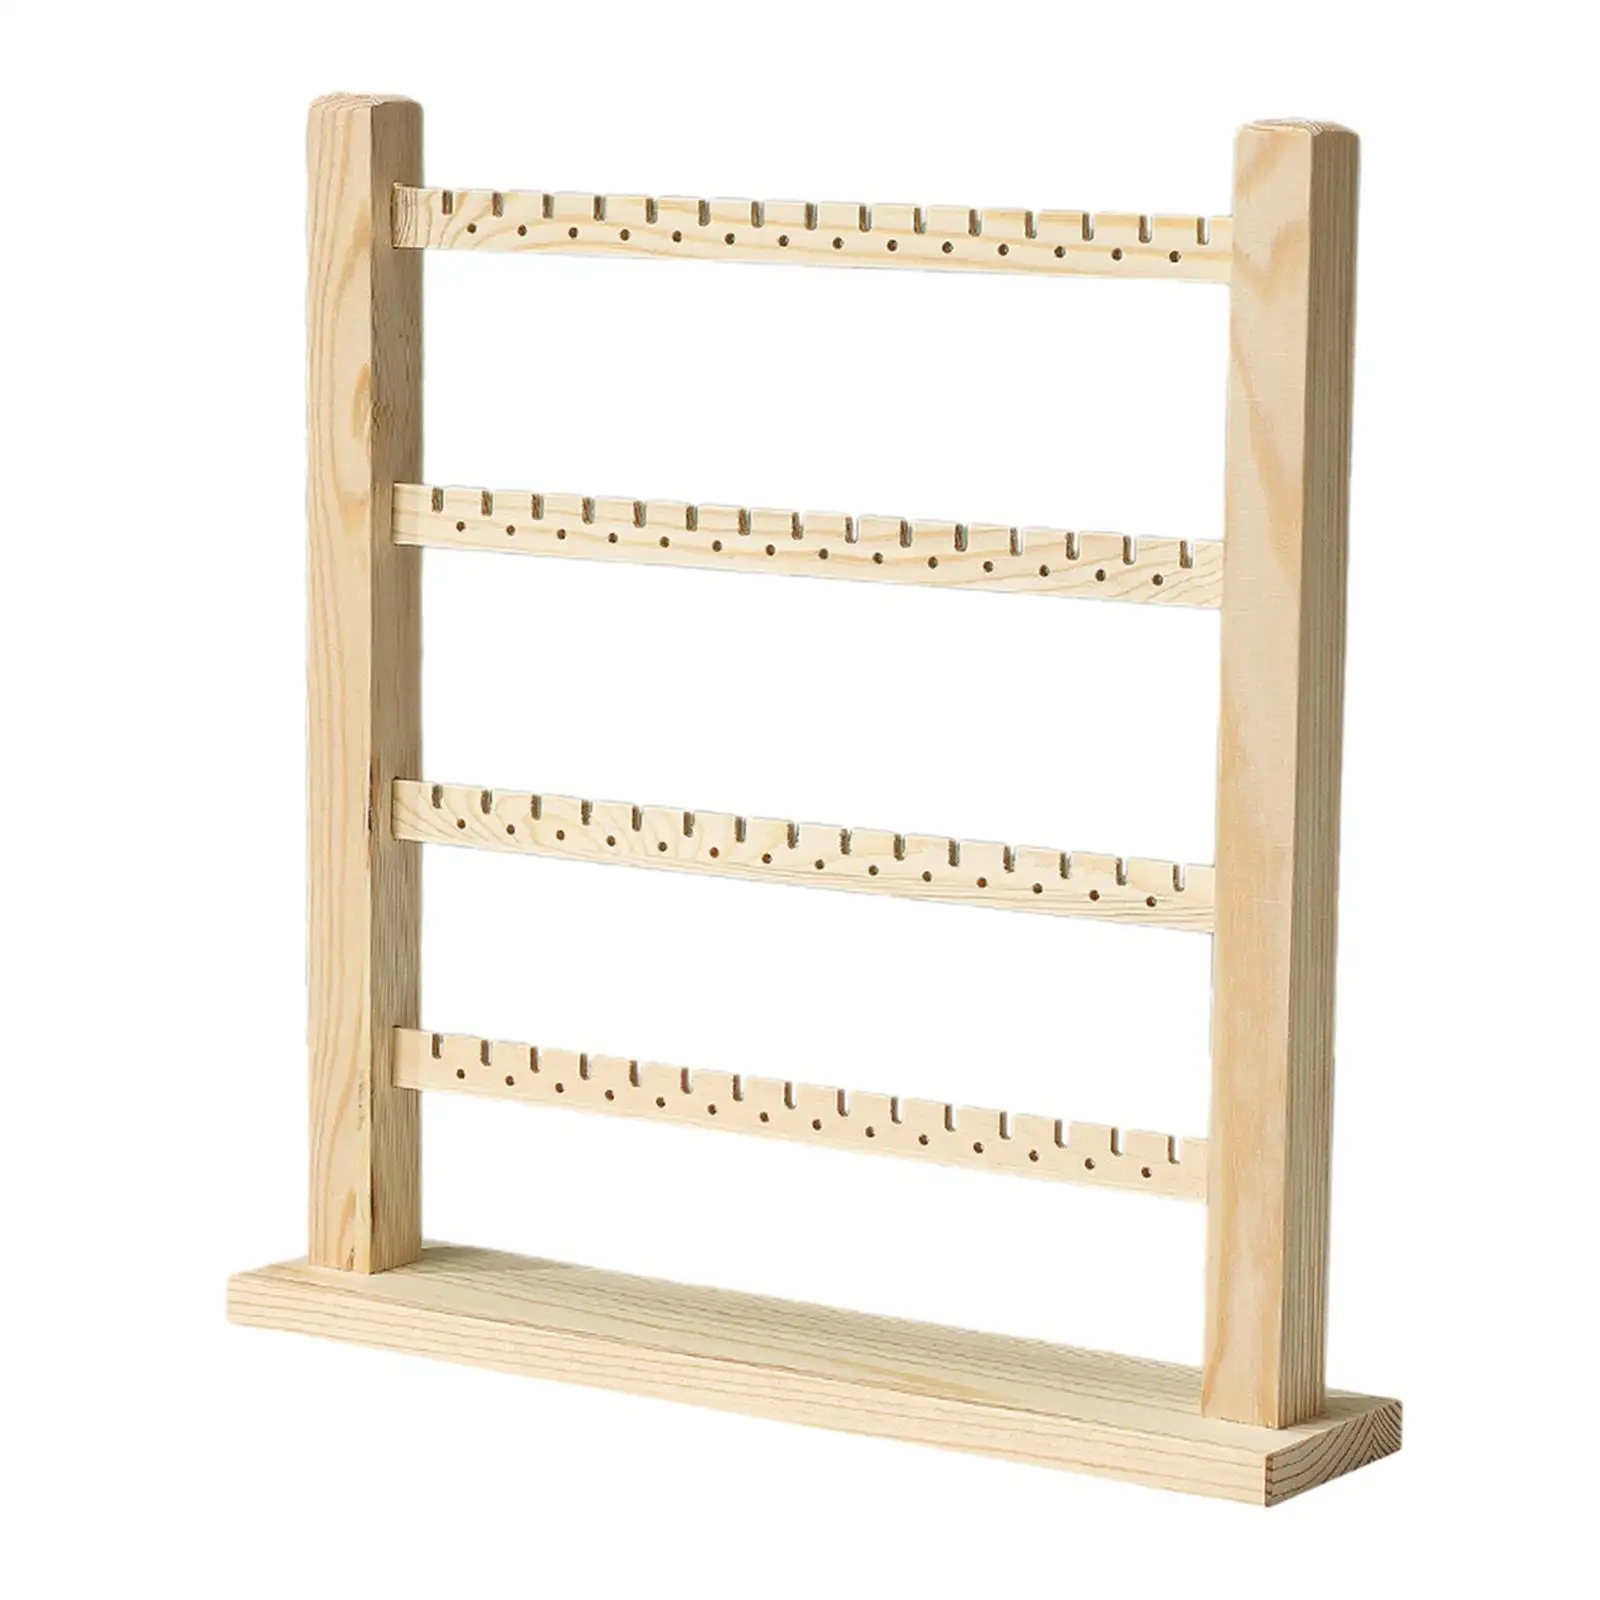 Jewelry Organizer Multi Tiers Wood Stable Base Earring Display Stand Ear Studs Holder for Home Vanity Store Desktop Dresser